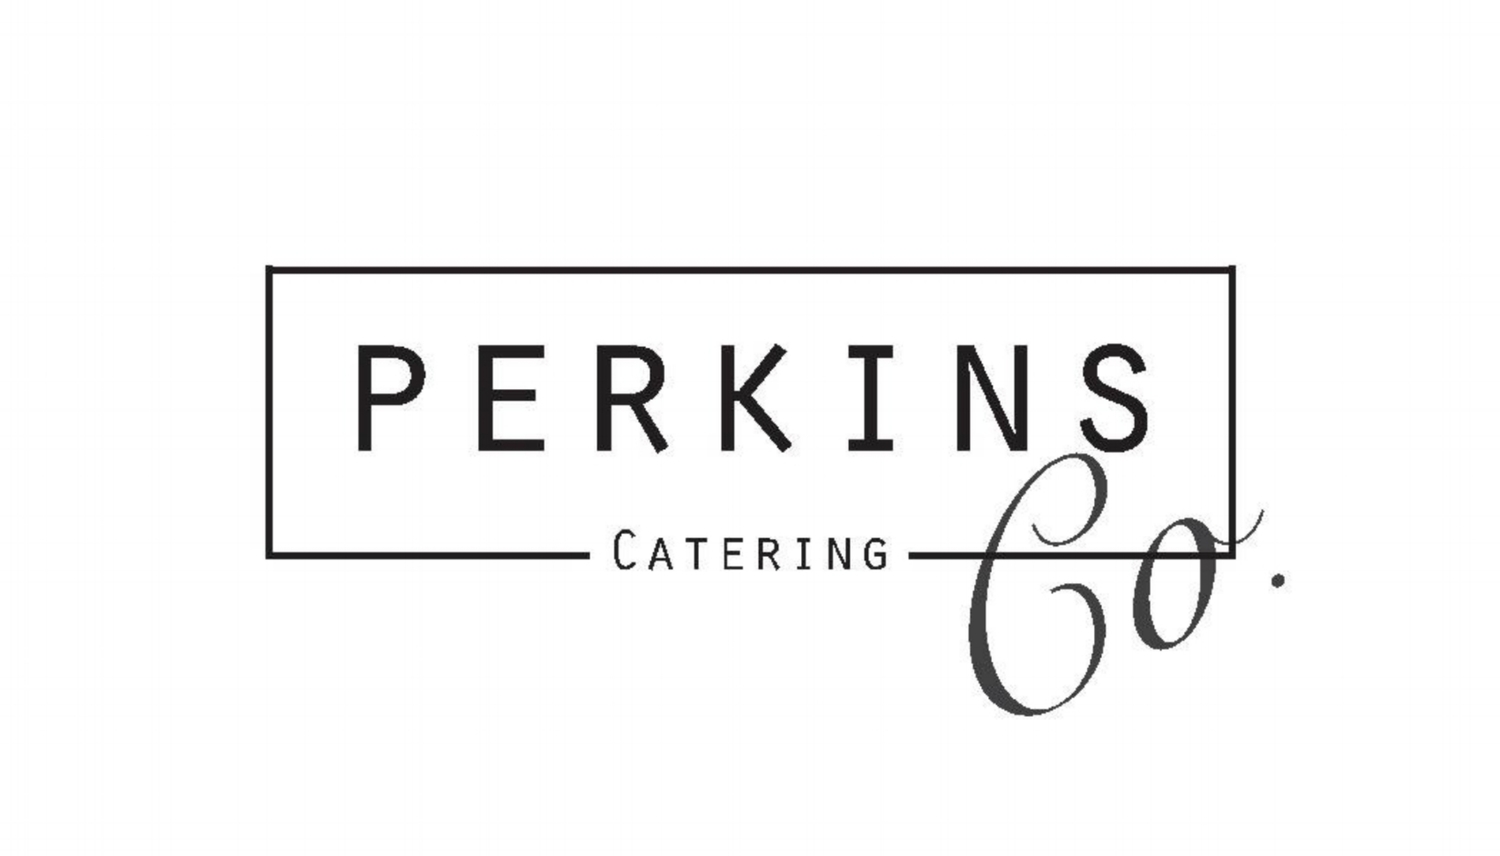 Perkins Catering Co.